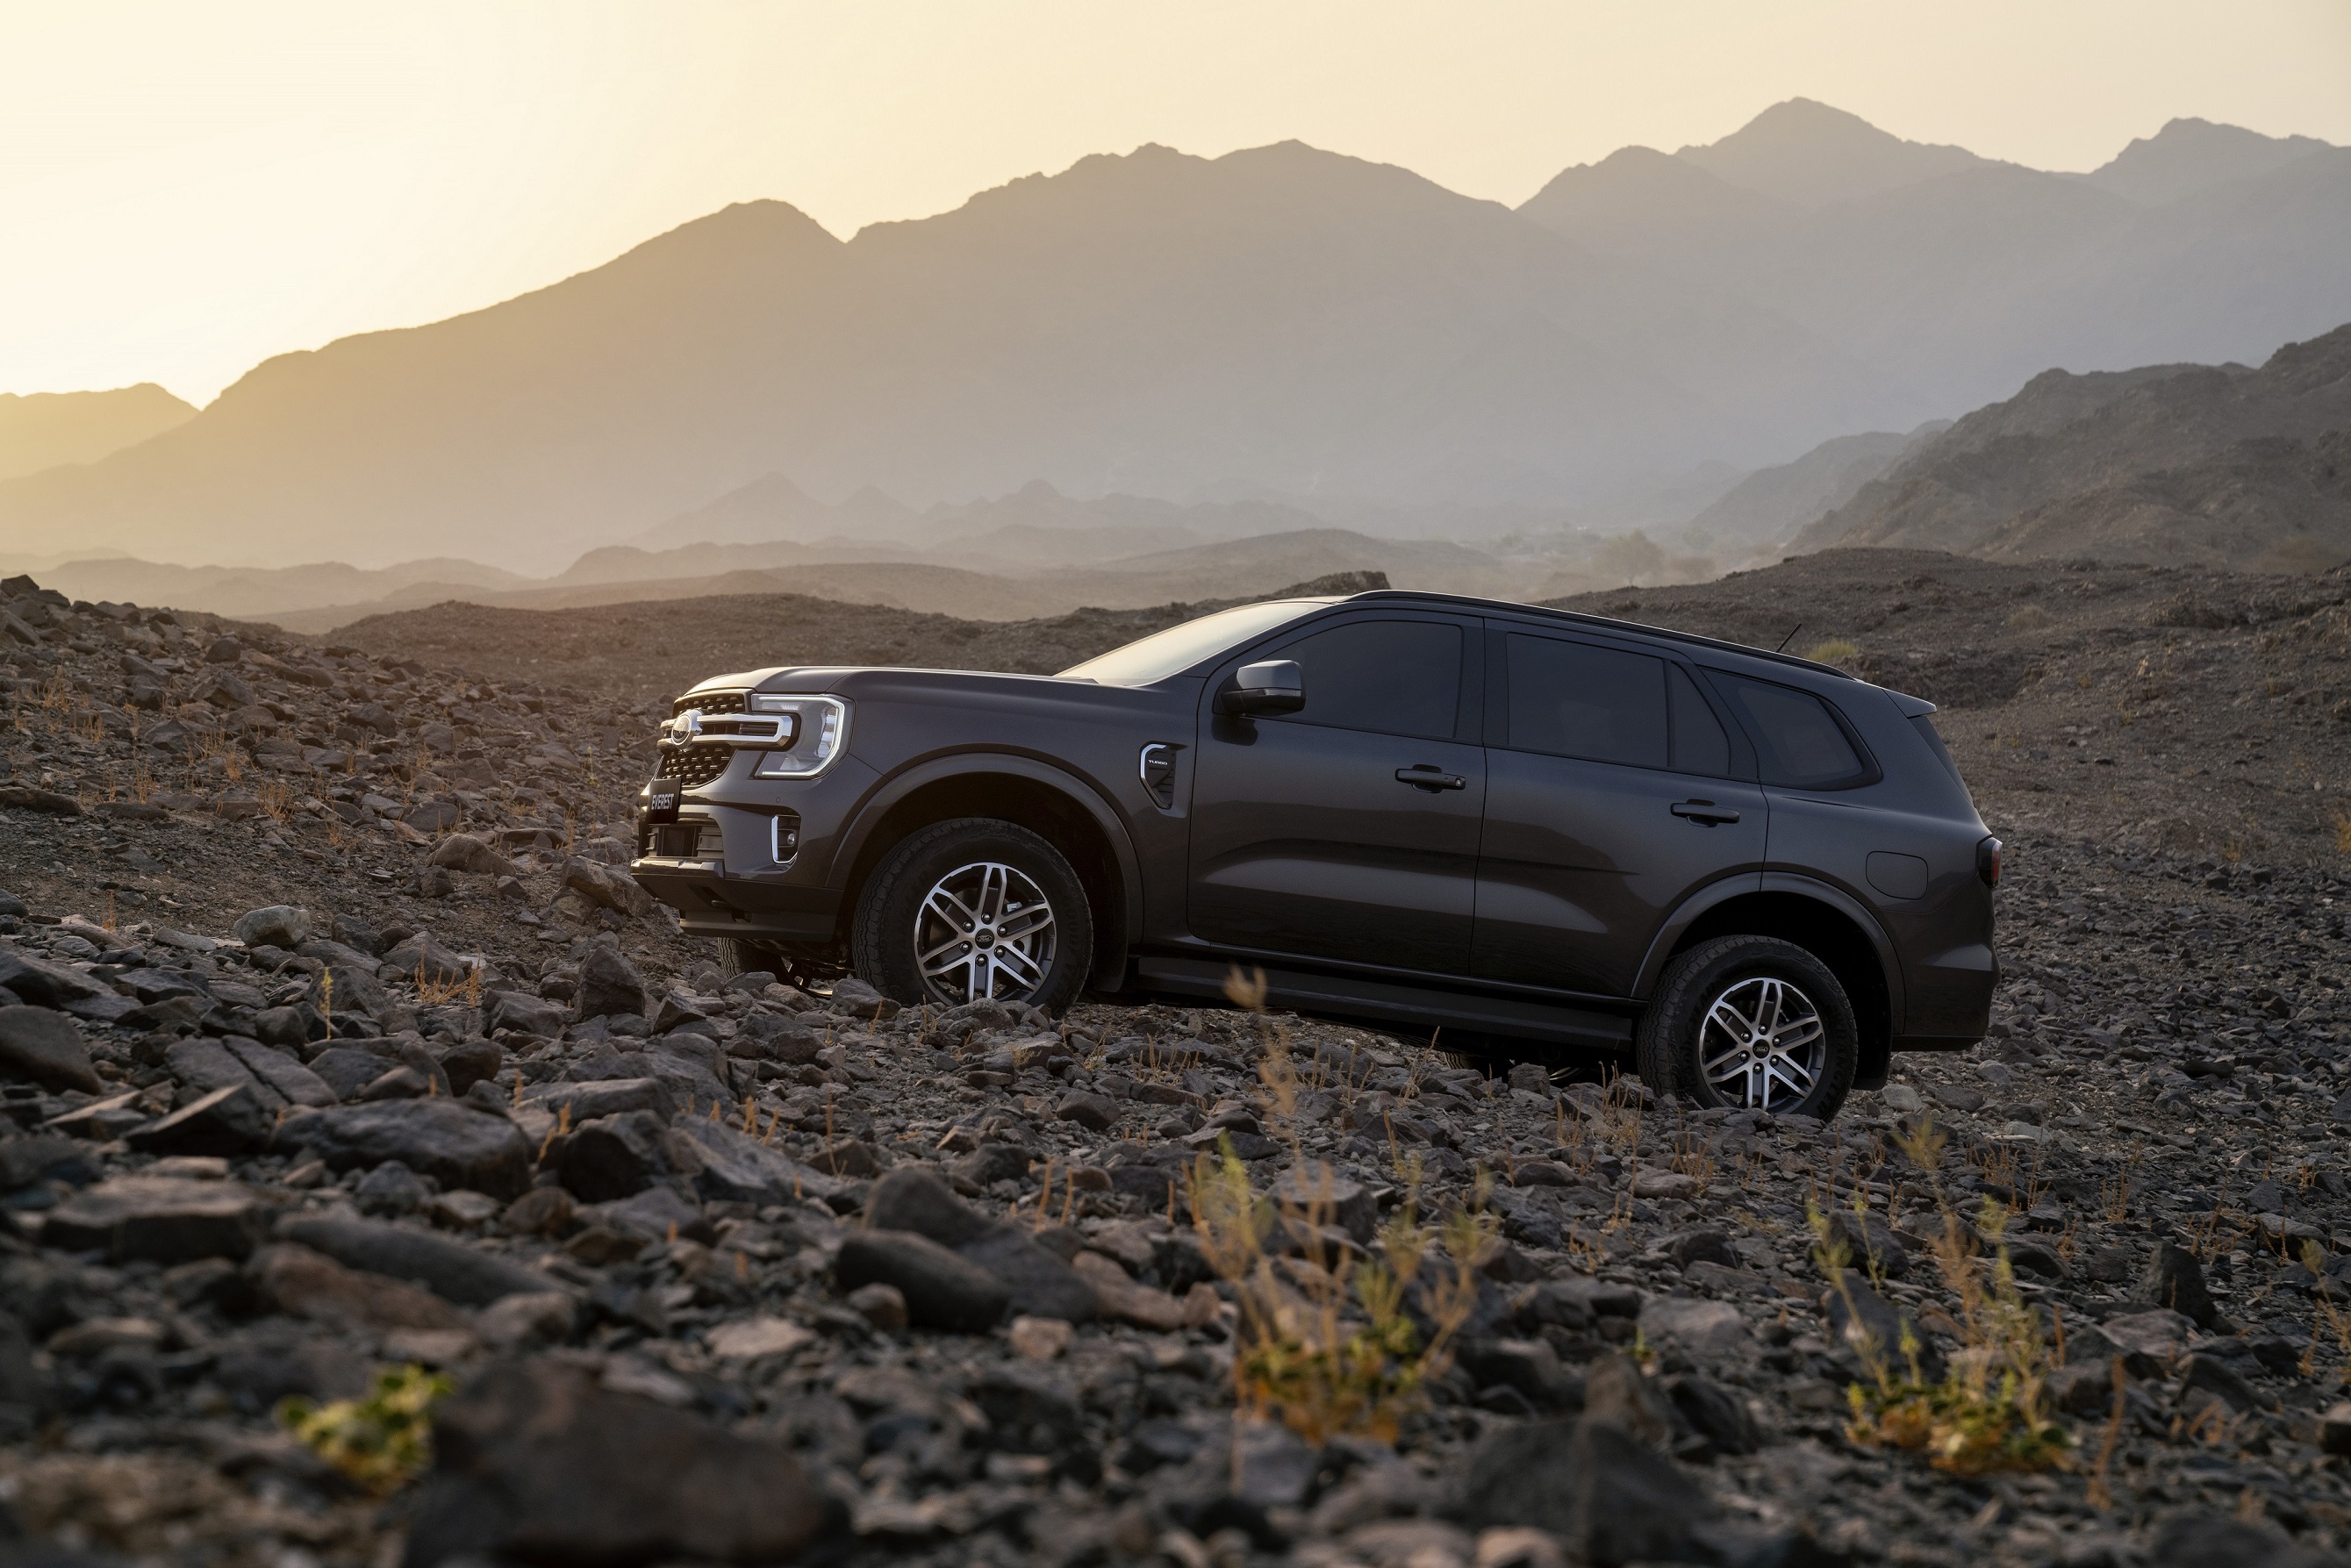 Next-Gen Ford Everest Built For The Adventurous, Providing Amazing Capability When The Road Runs Out